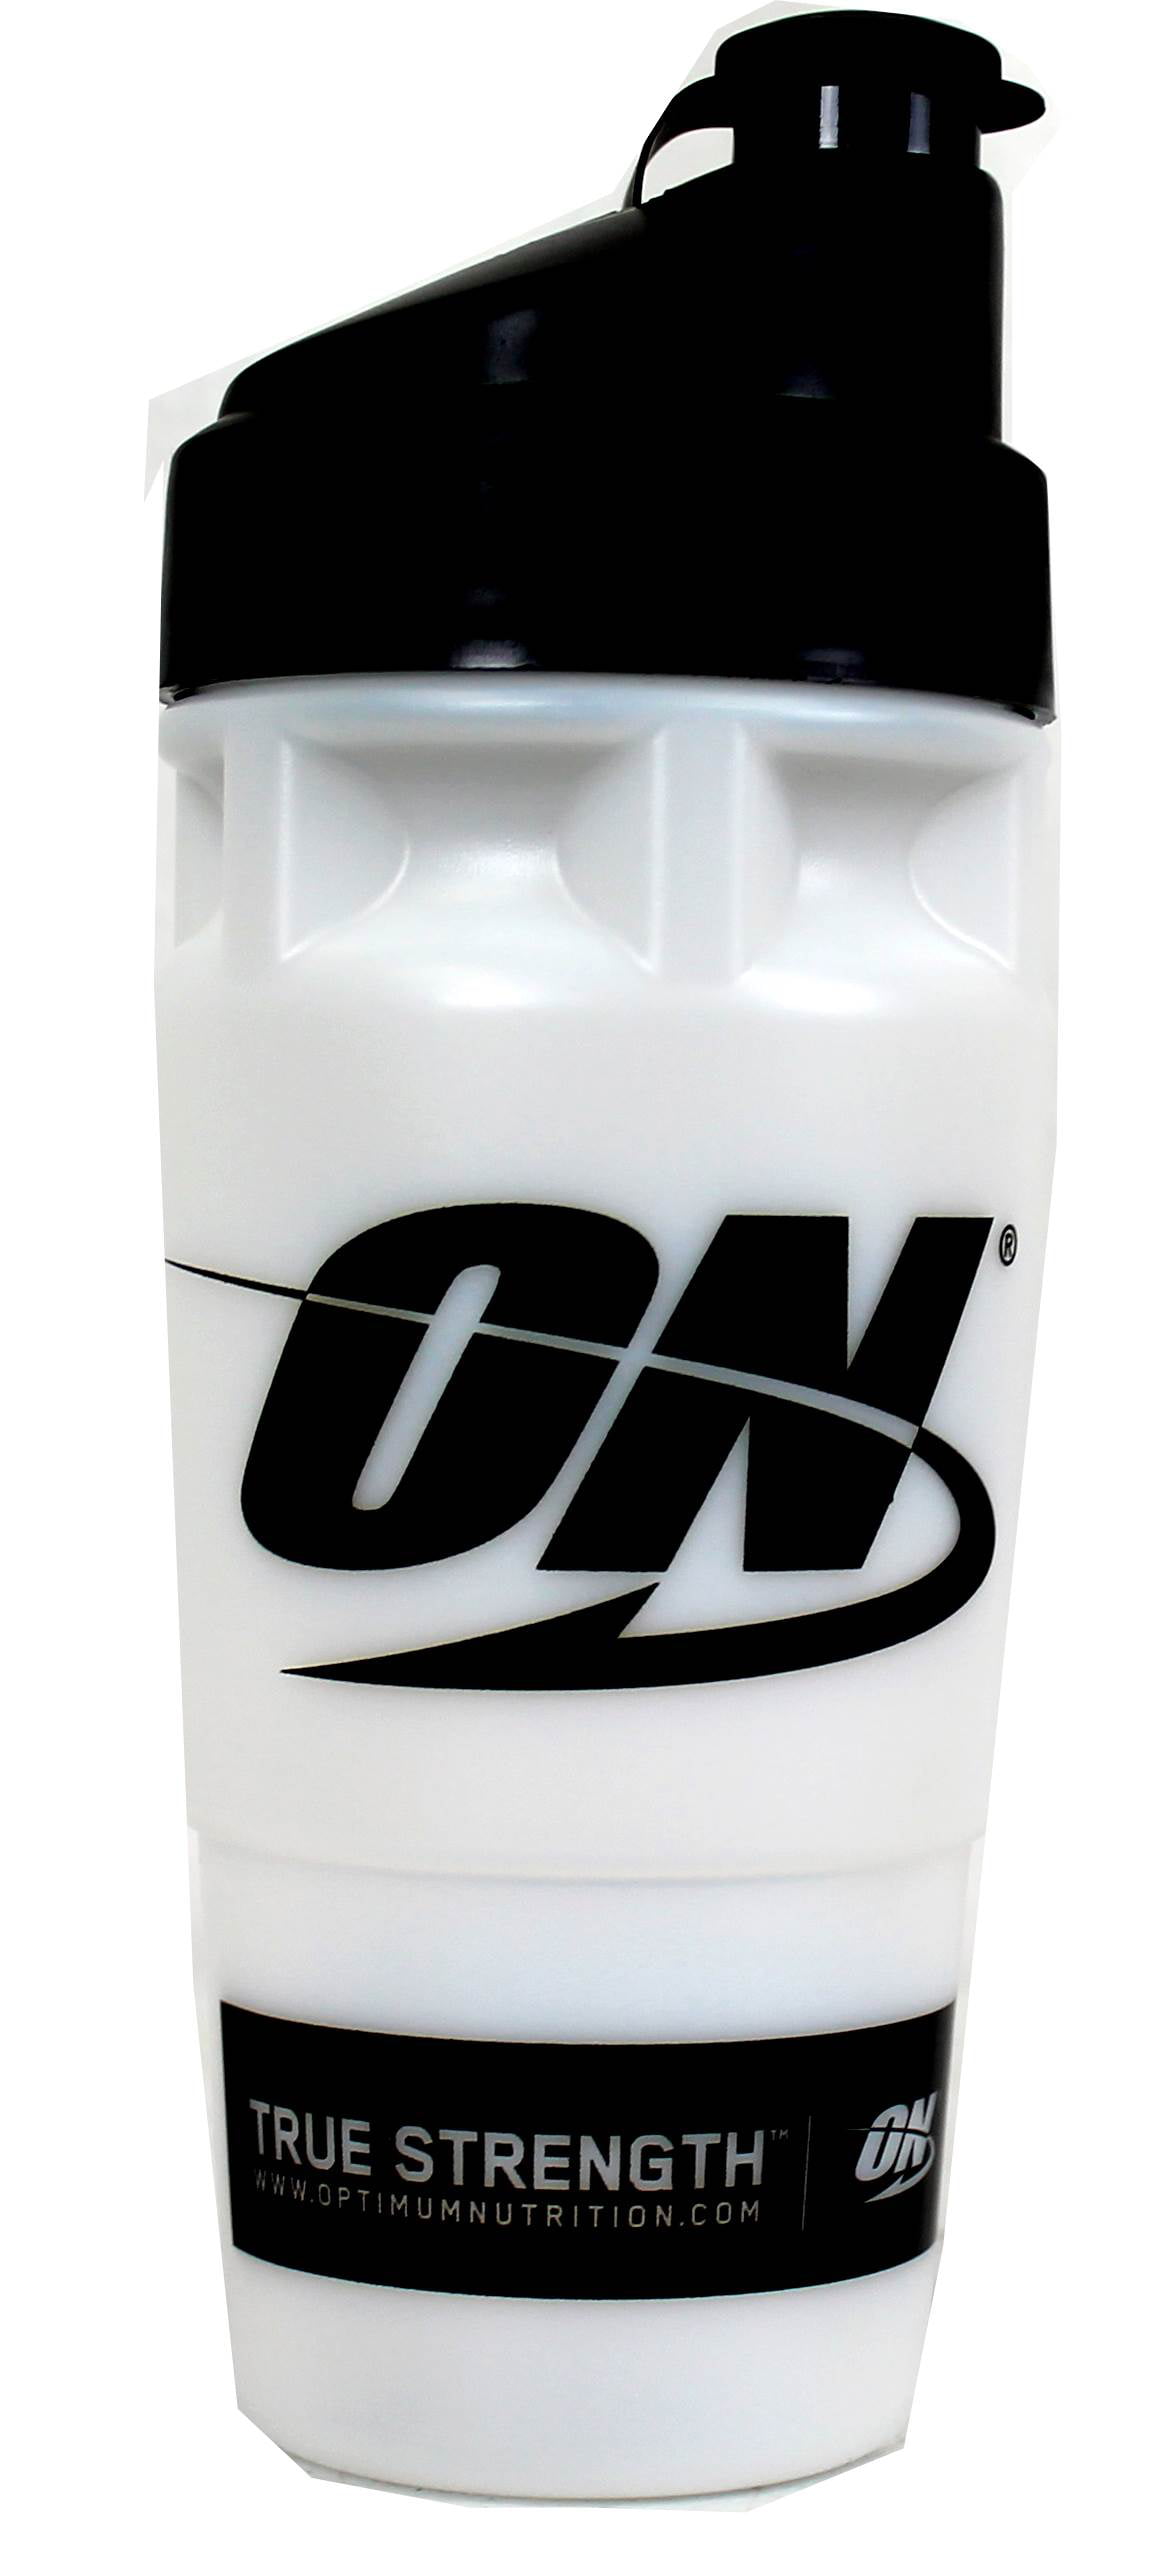 Optimum Nutrition Blue Heavy Duty Shaker Cup For Protein & Pre-workouts 